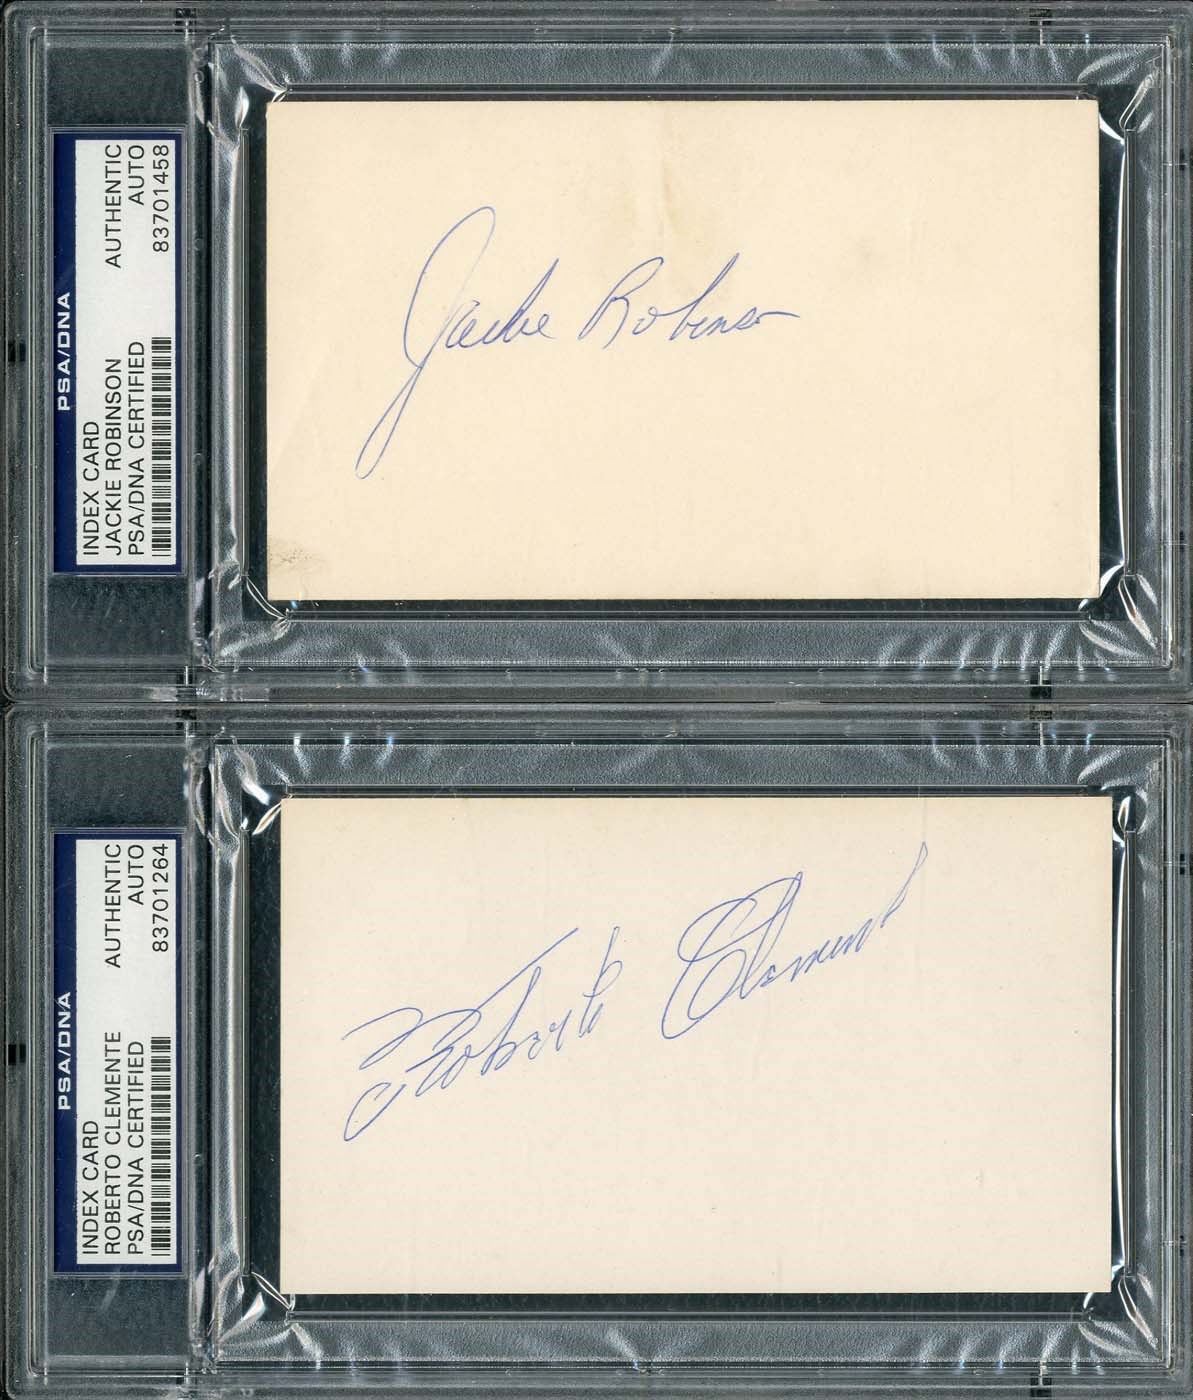 - Jackie Robinson & Roberto Clemente Signed Index Cards (PSA/DNA)